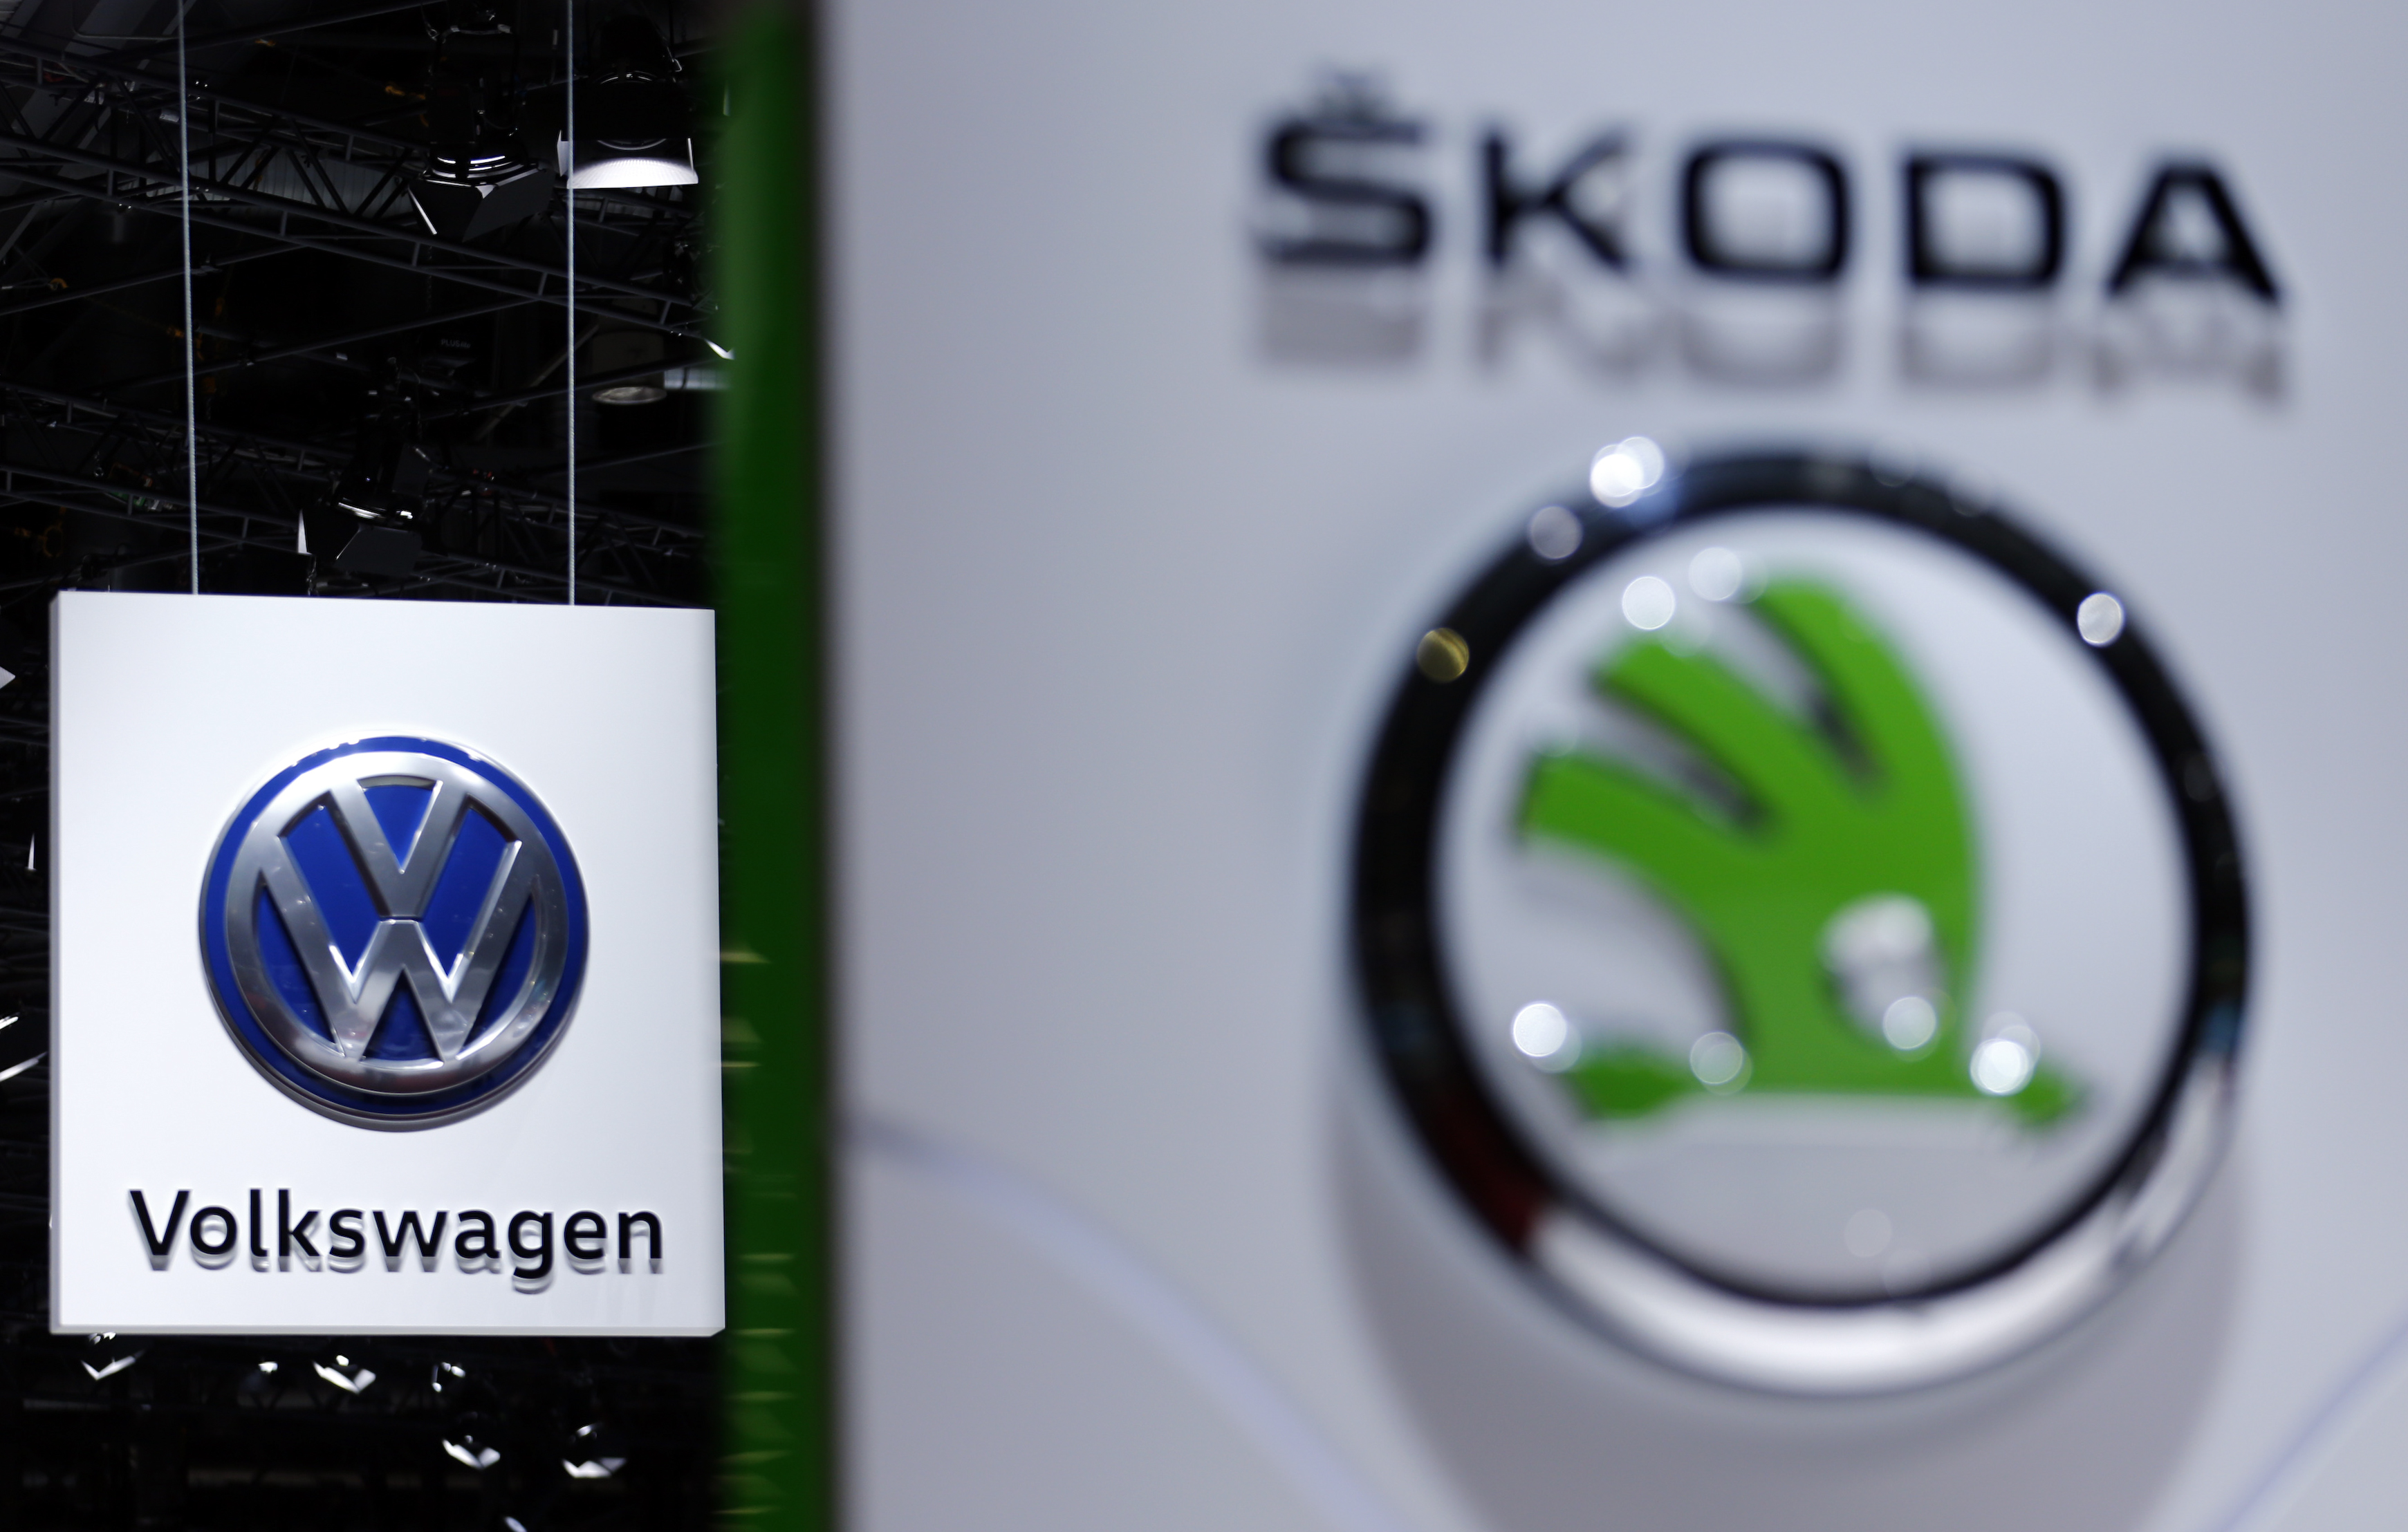 A Volkswagen (VW) logo is pictured next to a logo of Skoda during the second media day of the 86th International Motor Show in Geneva, Switzerland, March 2, 2016.   REUTERS/Denis Balibouse